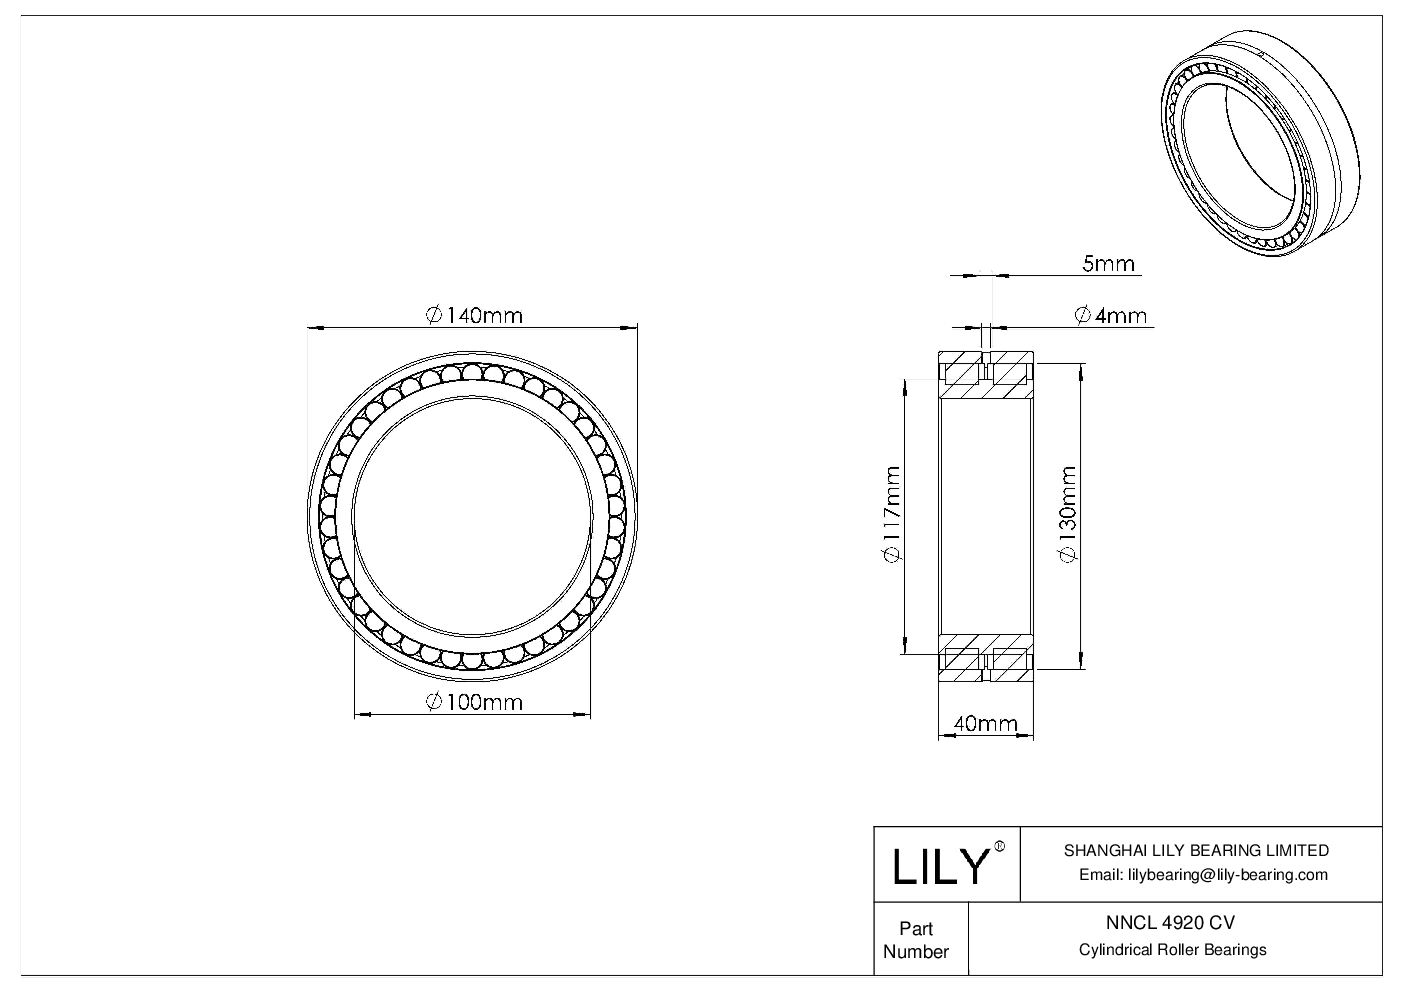 NNCL 4920 CV Double Row Full Complement Cylindrical Roller Bearings cad drawing